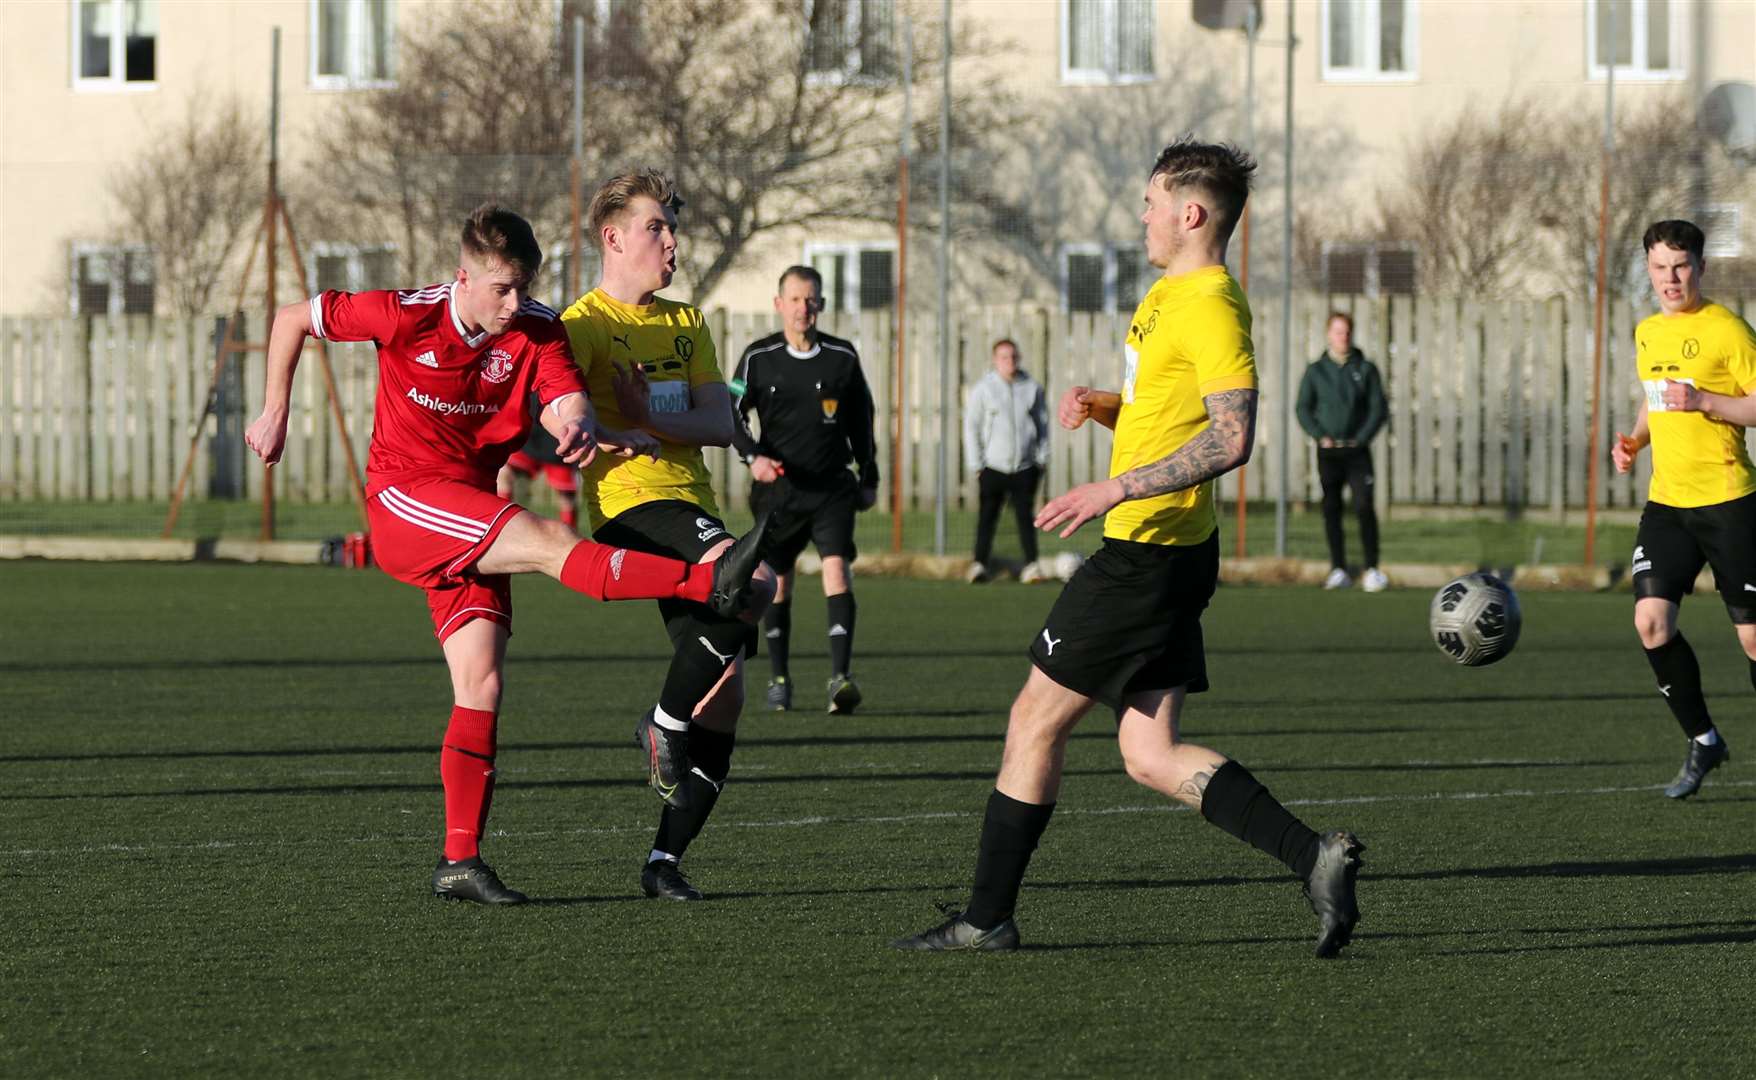 Thurso's Grant Aitkenhead has a shot at goal during the North Caledonian Cup first-round tie against Nairn County 'A' at Naver. Picture: James Gunn